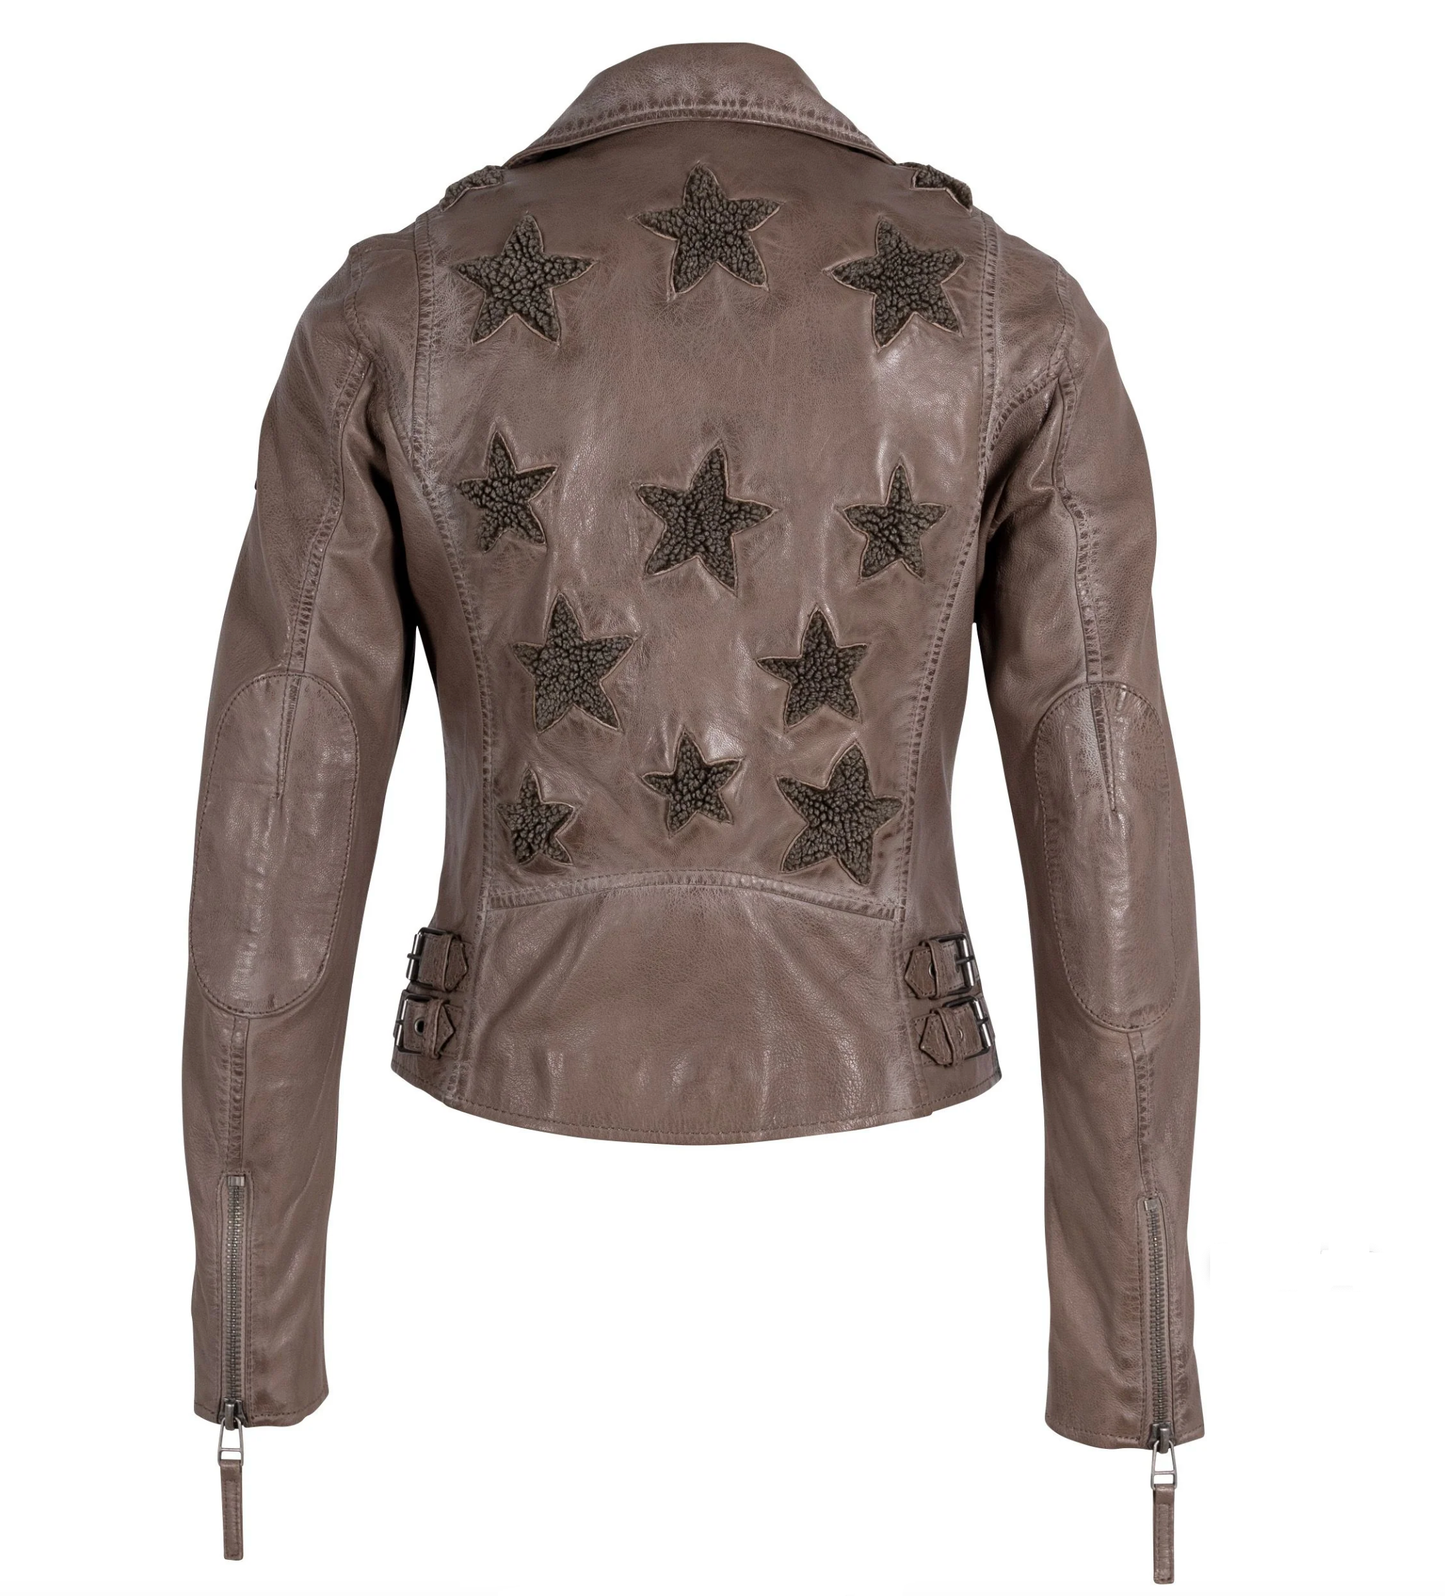 Mauritius Mauritius - Christy RF Woman's Leather Jacket with Sherpa Stars - Cozy Taupe available at The Good Life Boutique